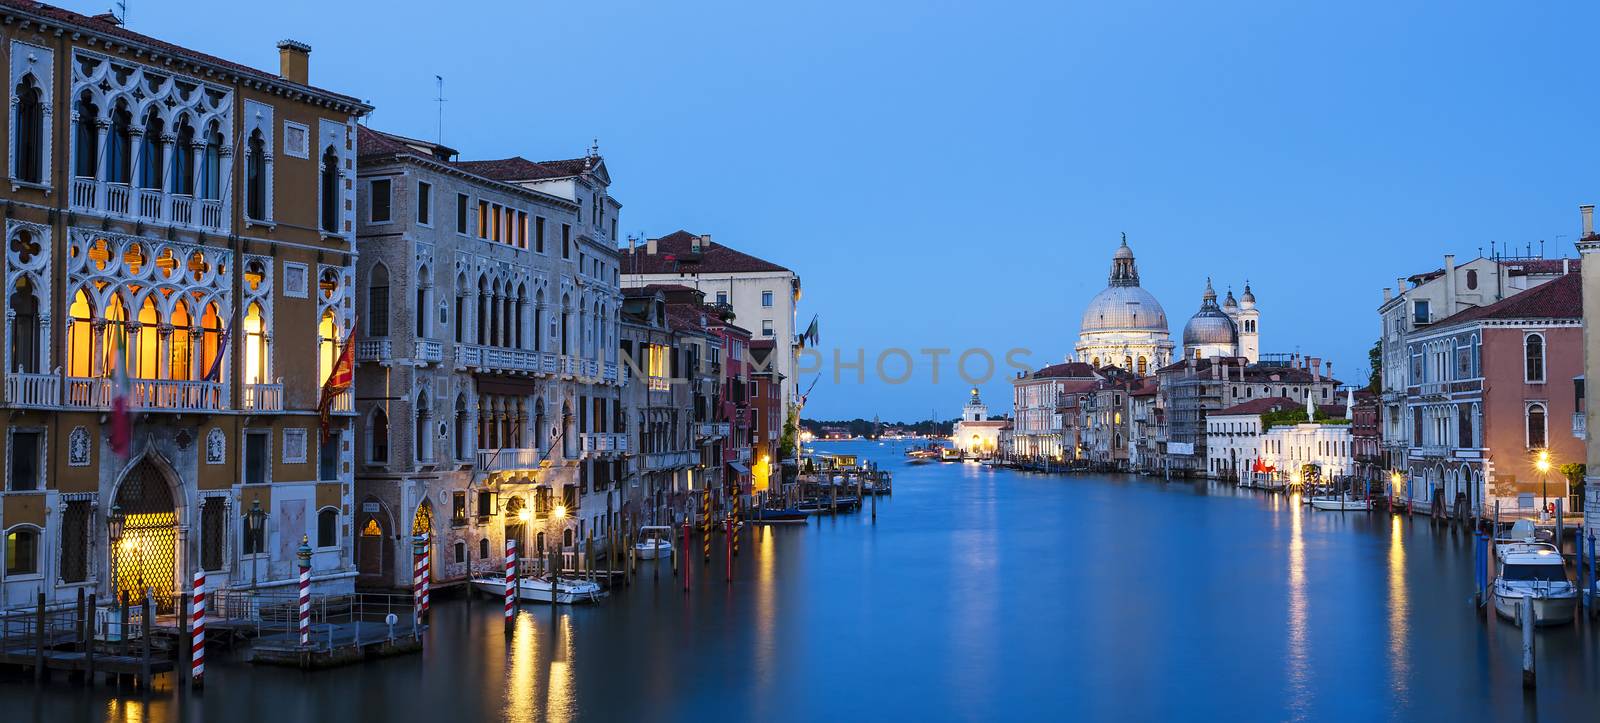 Panoramic view of the Grand Canal by vwalakte